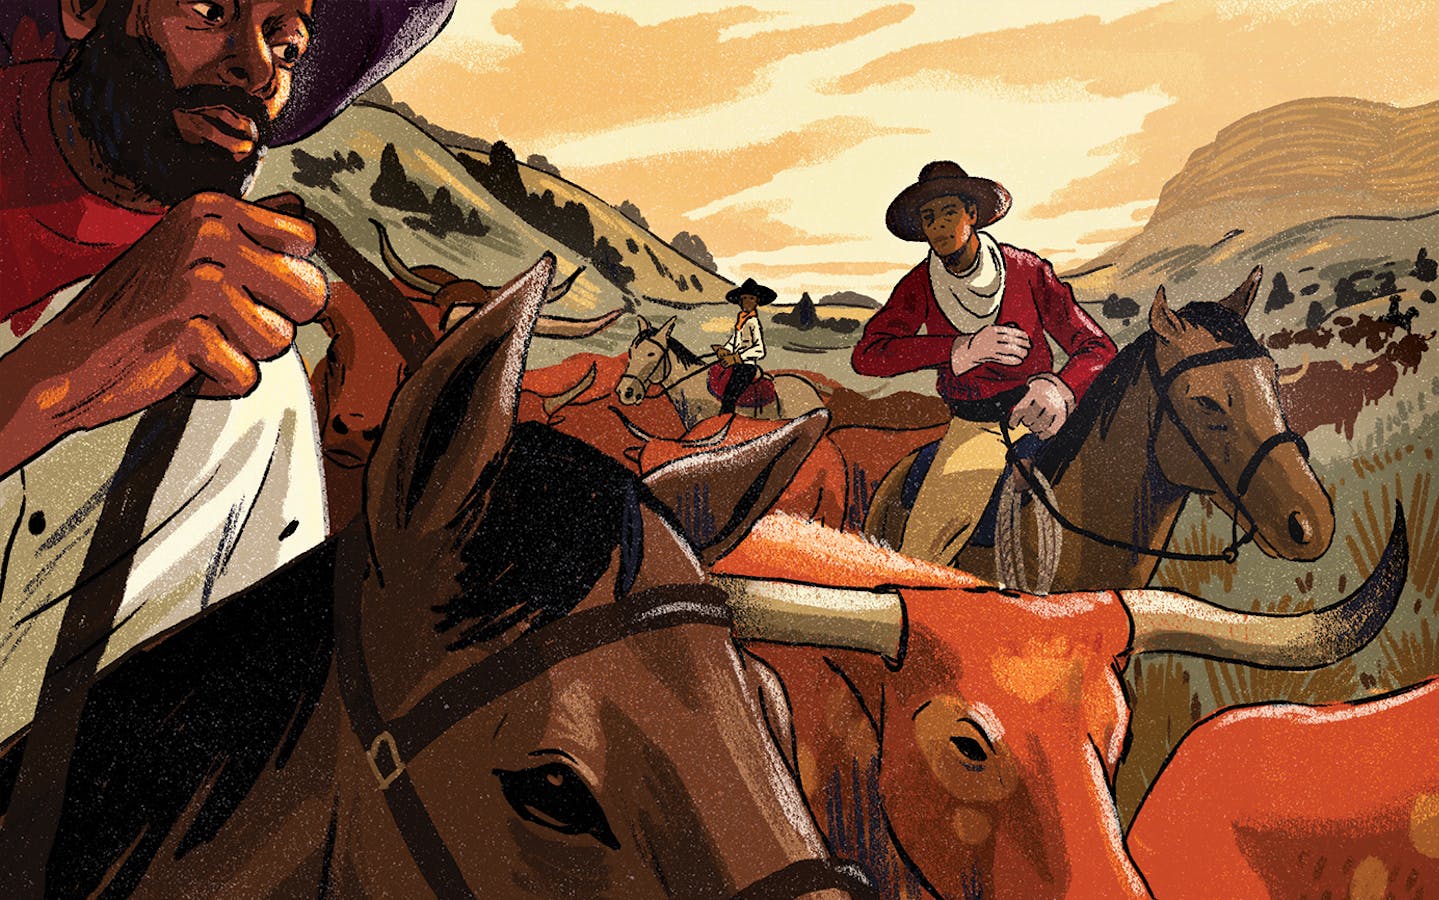 Picturing A Rich Culture of Black Cowboys and Cowgirls in Louisiana